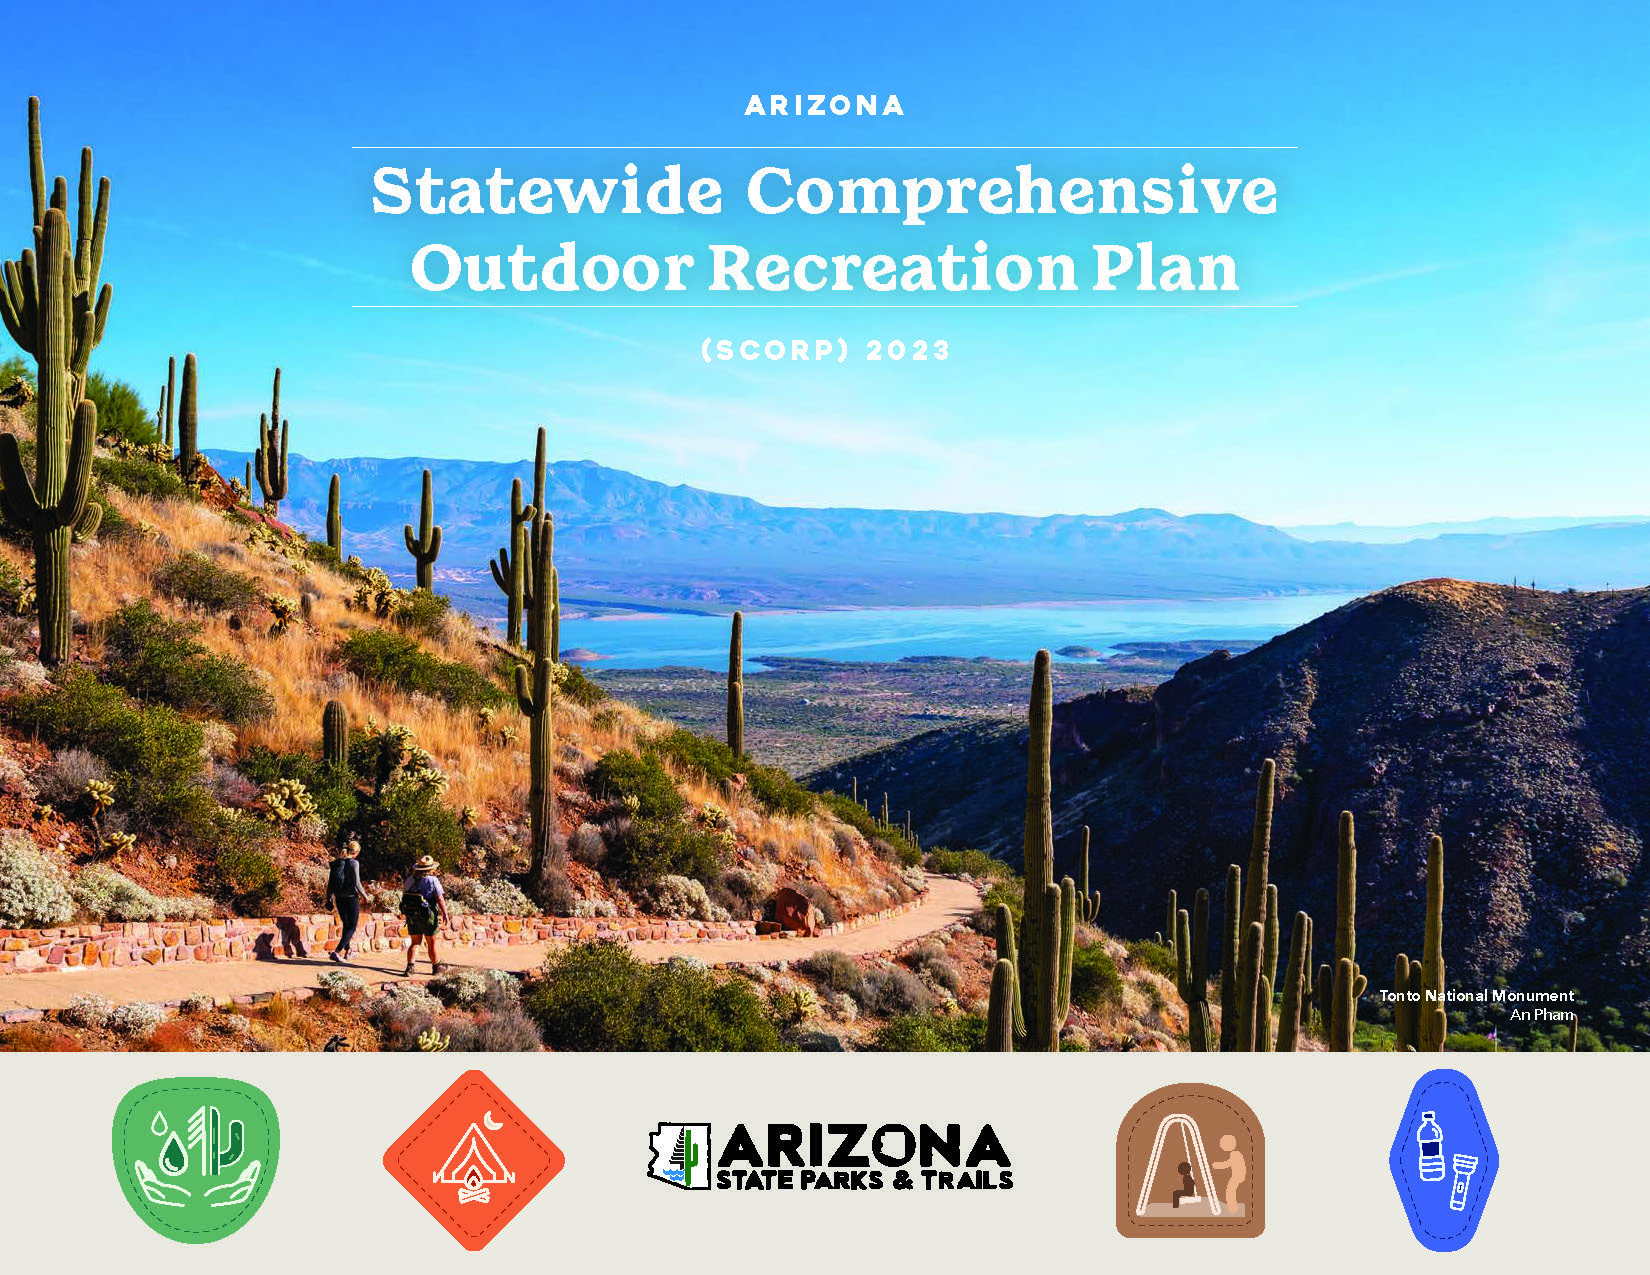 The cover of the 2023 Statewide Comprehensive Outdoor Recreation Plan